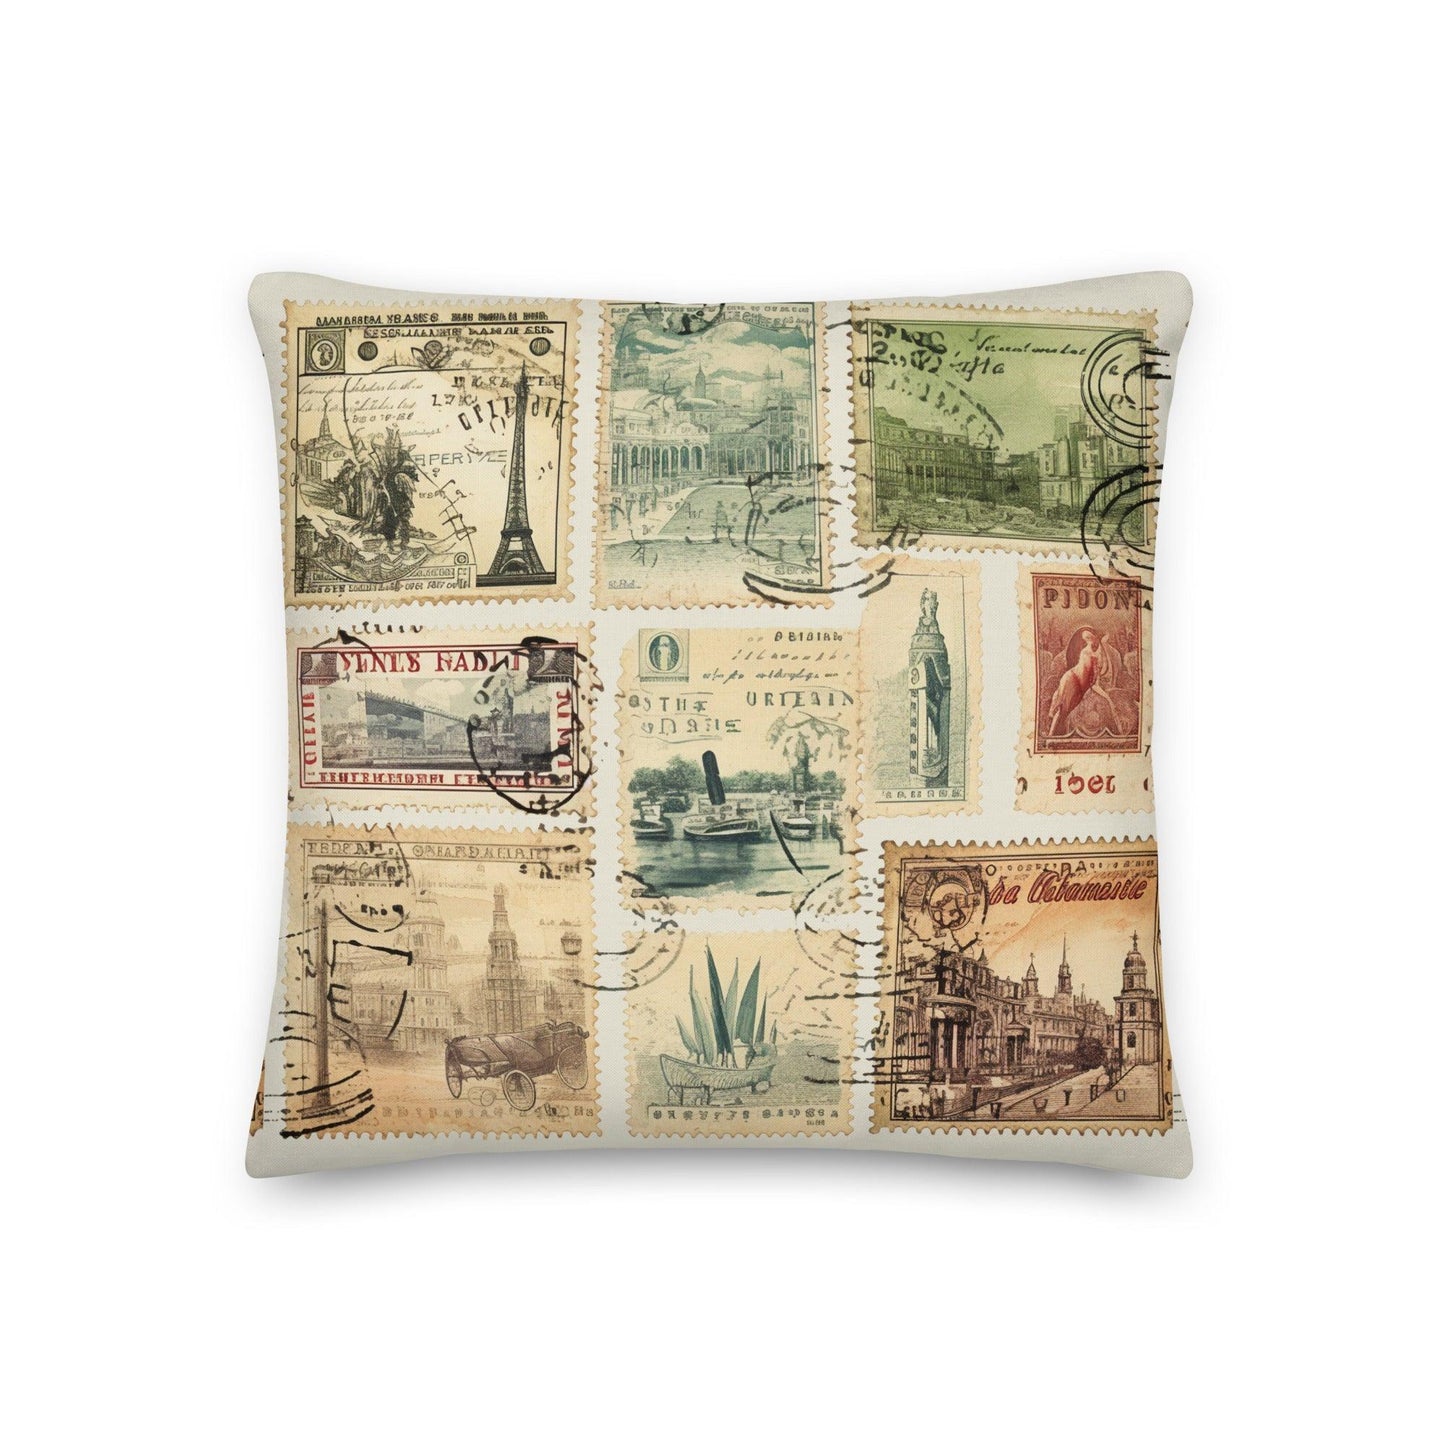 Vintage Travel Stamps Throw Pillow - The Global Wanderer